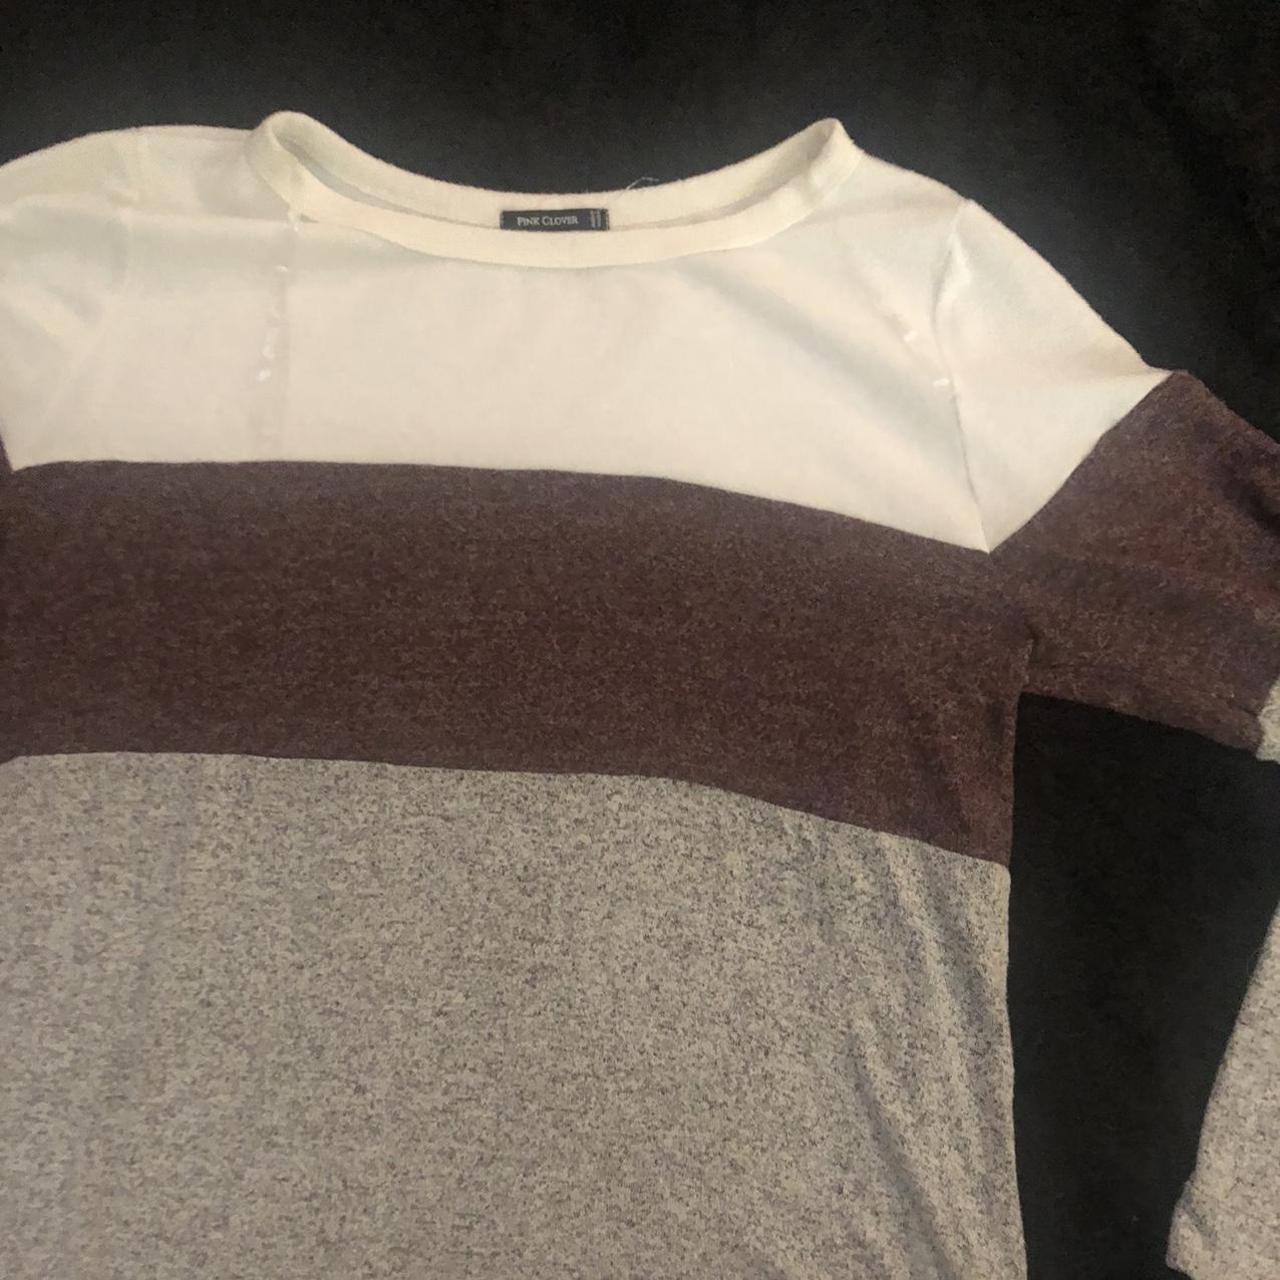 Product Image 2 - Oversized Comfy light Sweater with